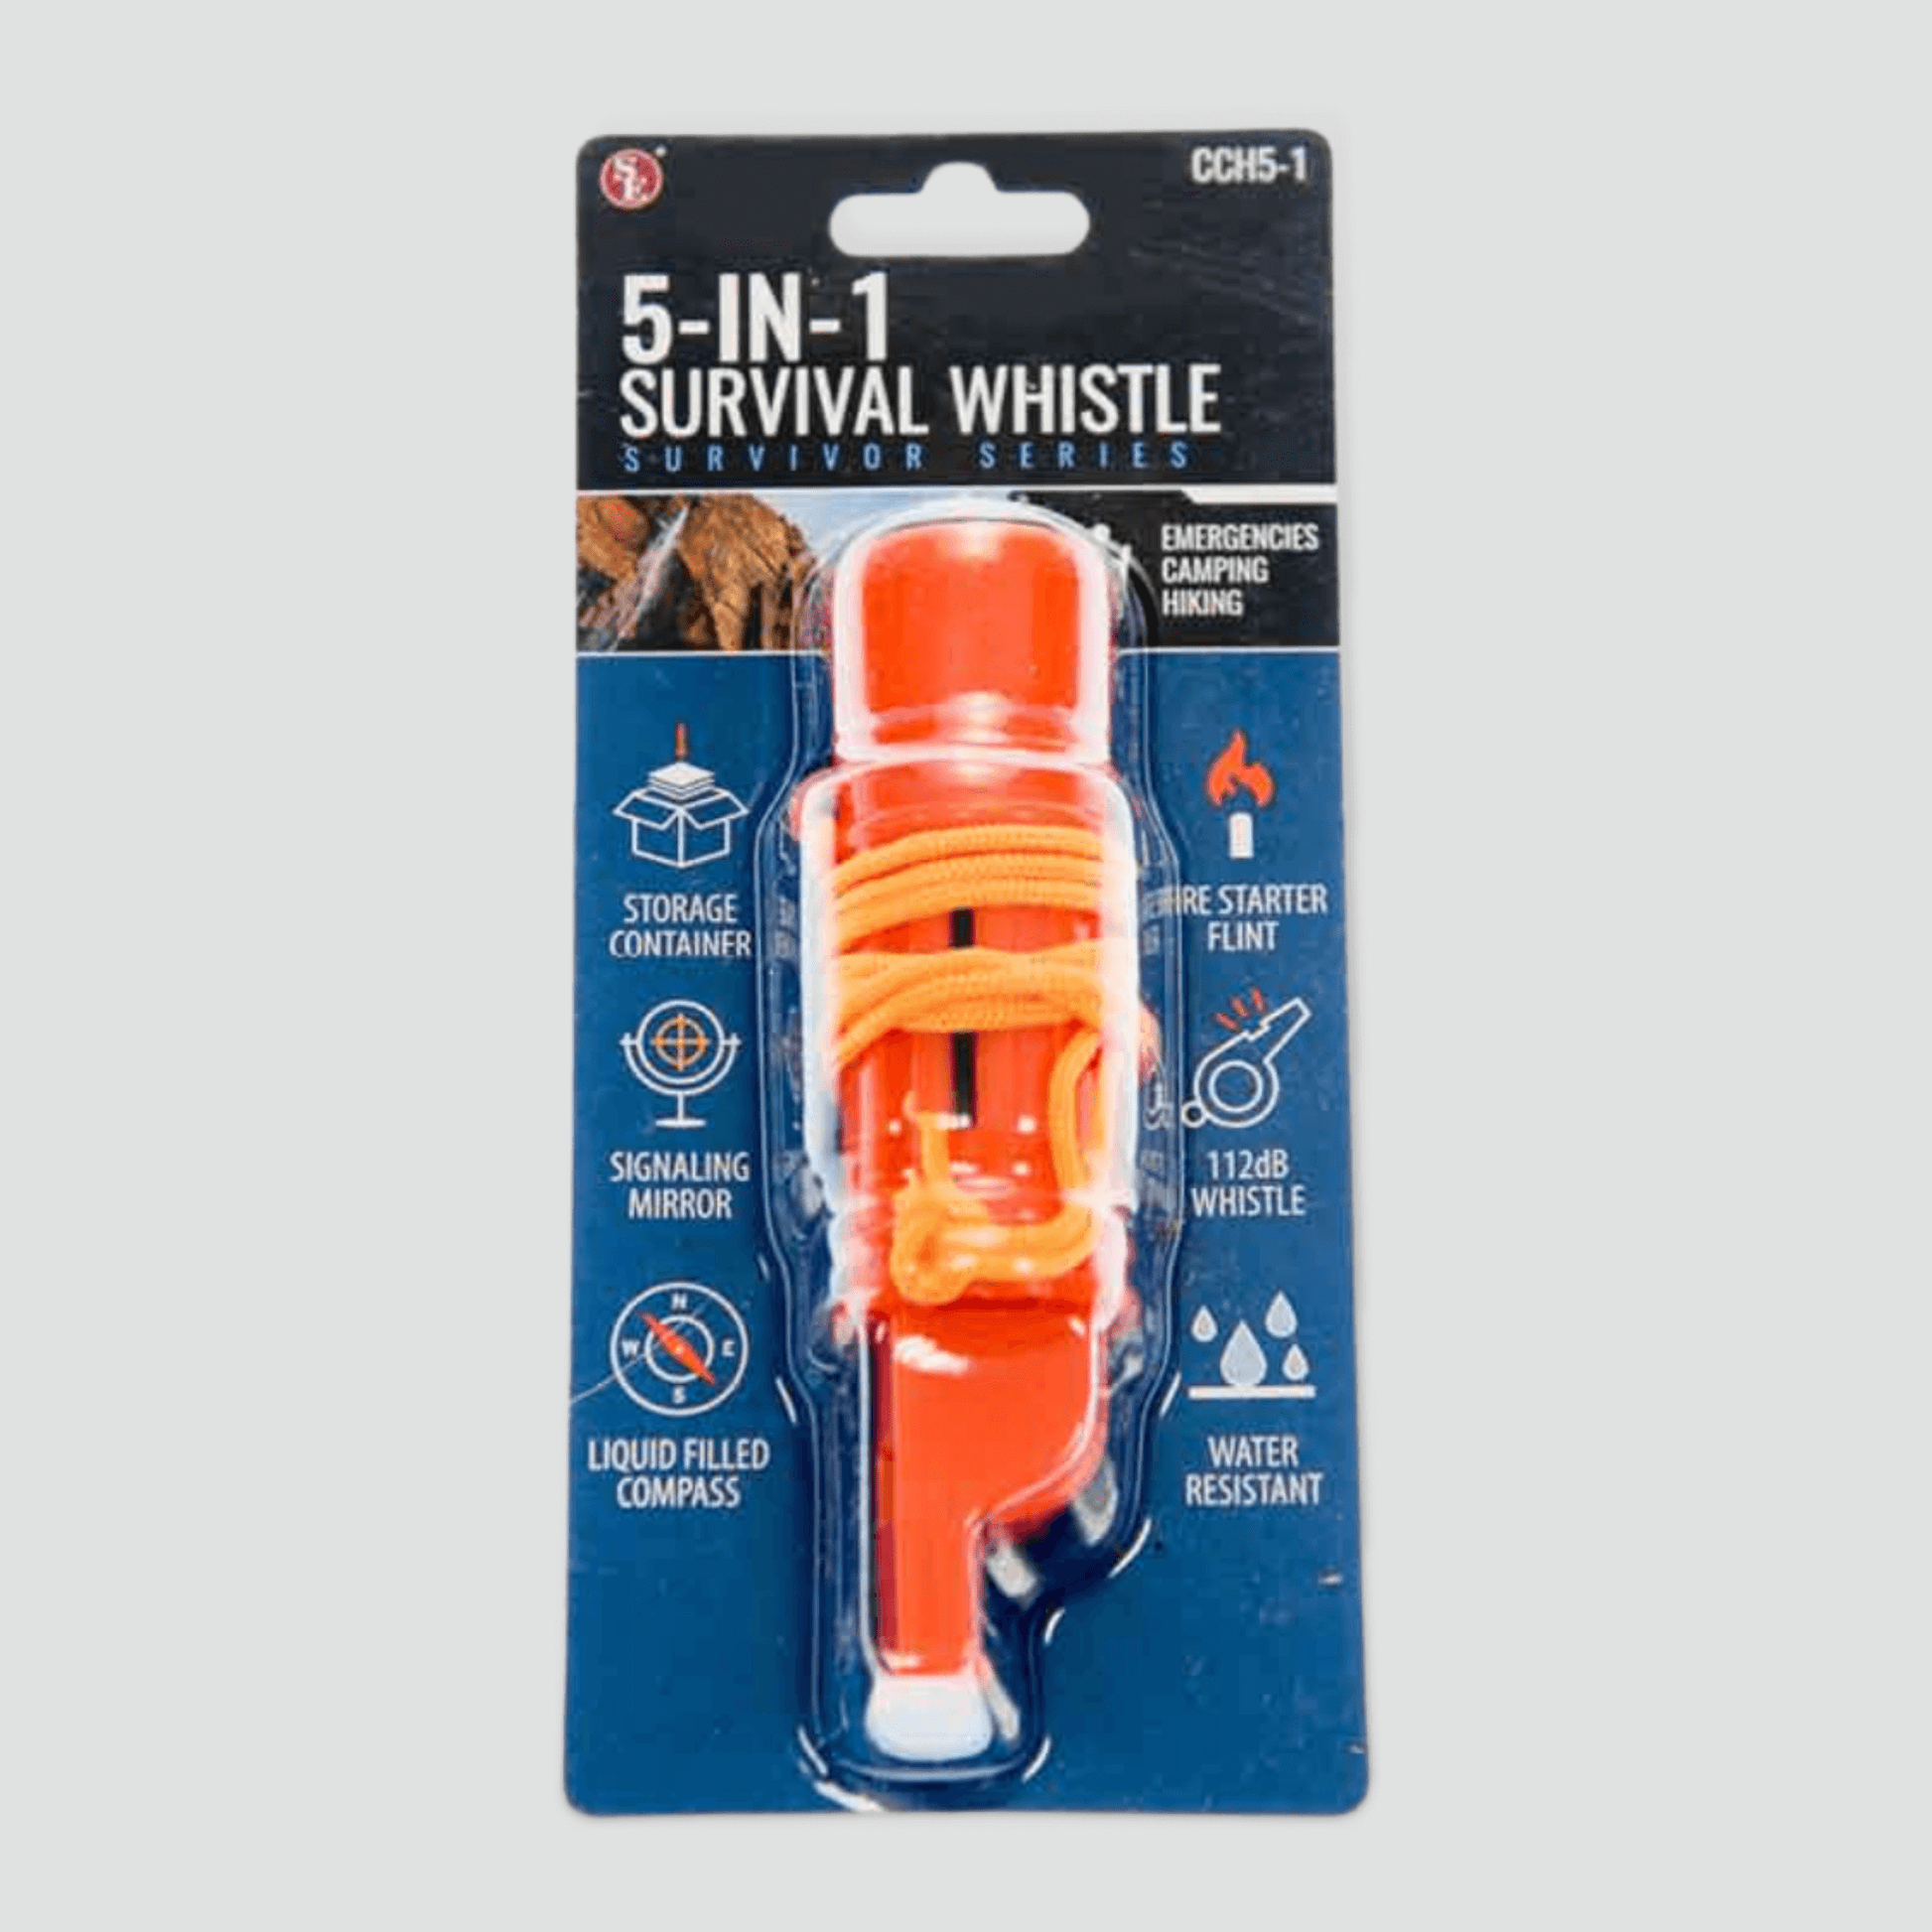 Five in one survival whistle with neck strap